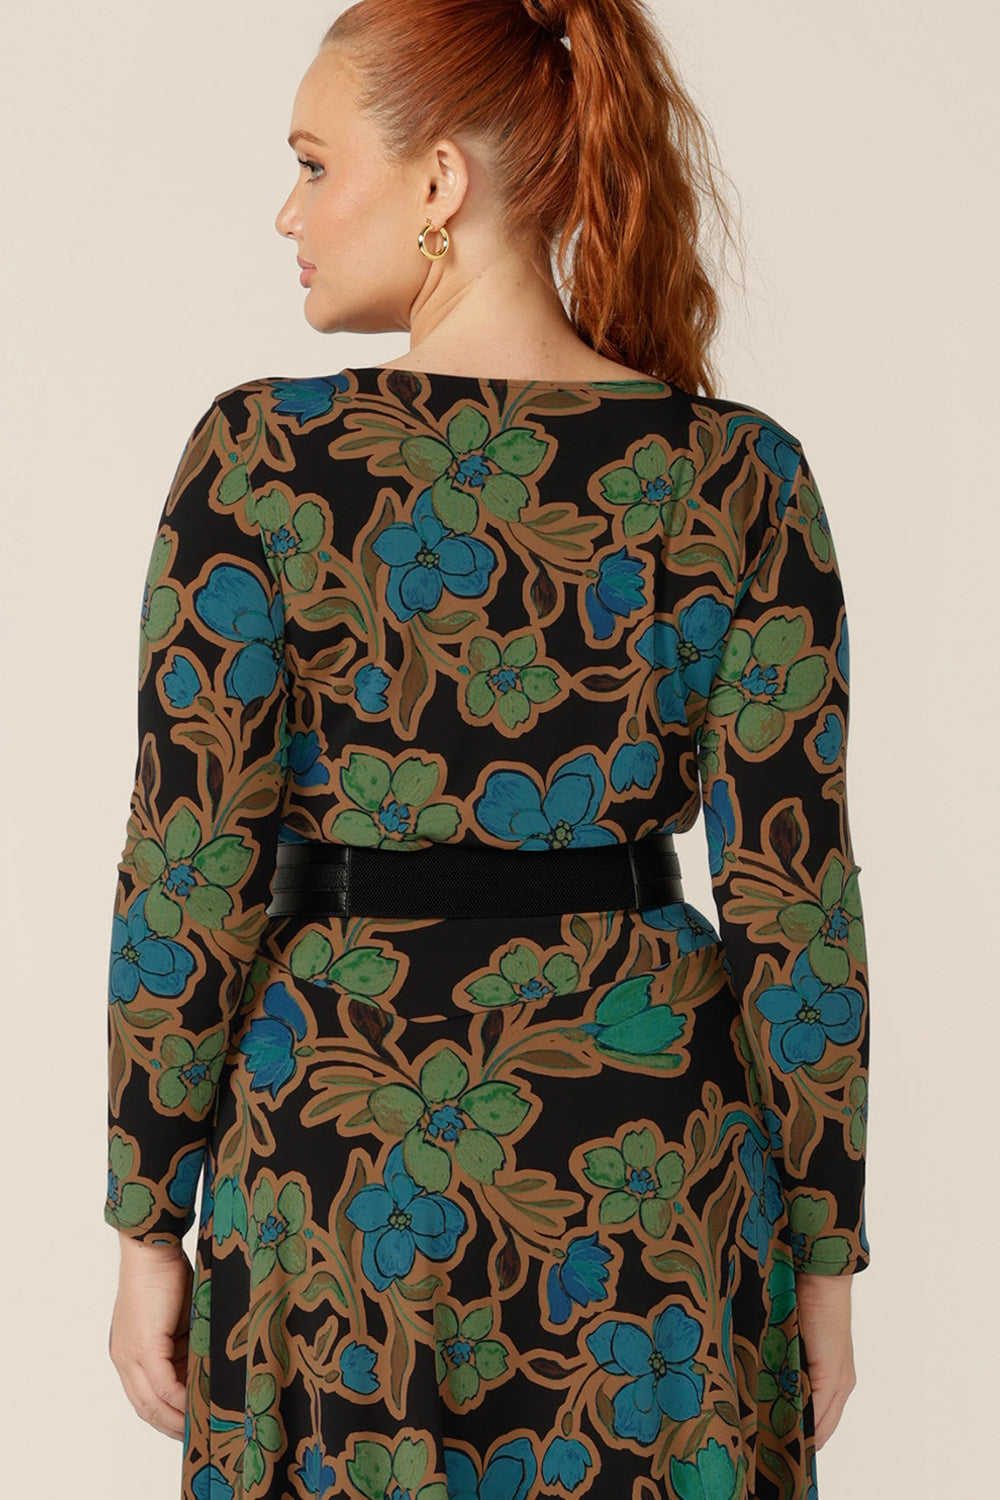 Back view of a size 12, curvy woman wearing a floral print, boat neck top with long sleeves with a an asymmetric skirt and black belt to create a faux dress effect. Both are made in Australia by size inclusive clothing label, L&F.